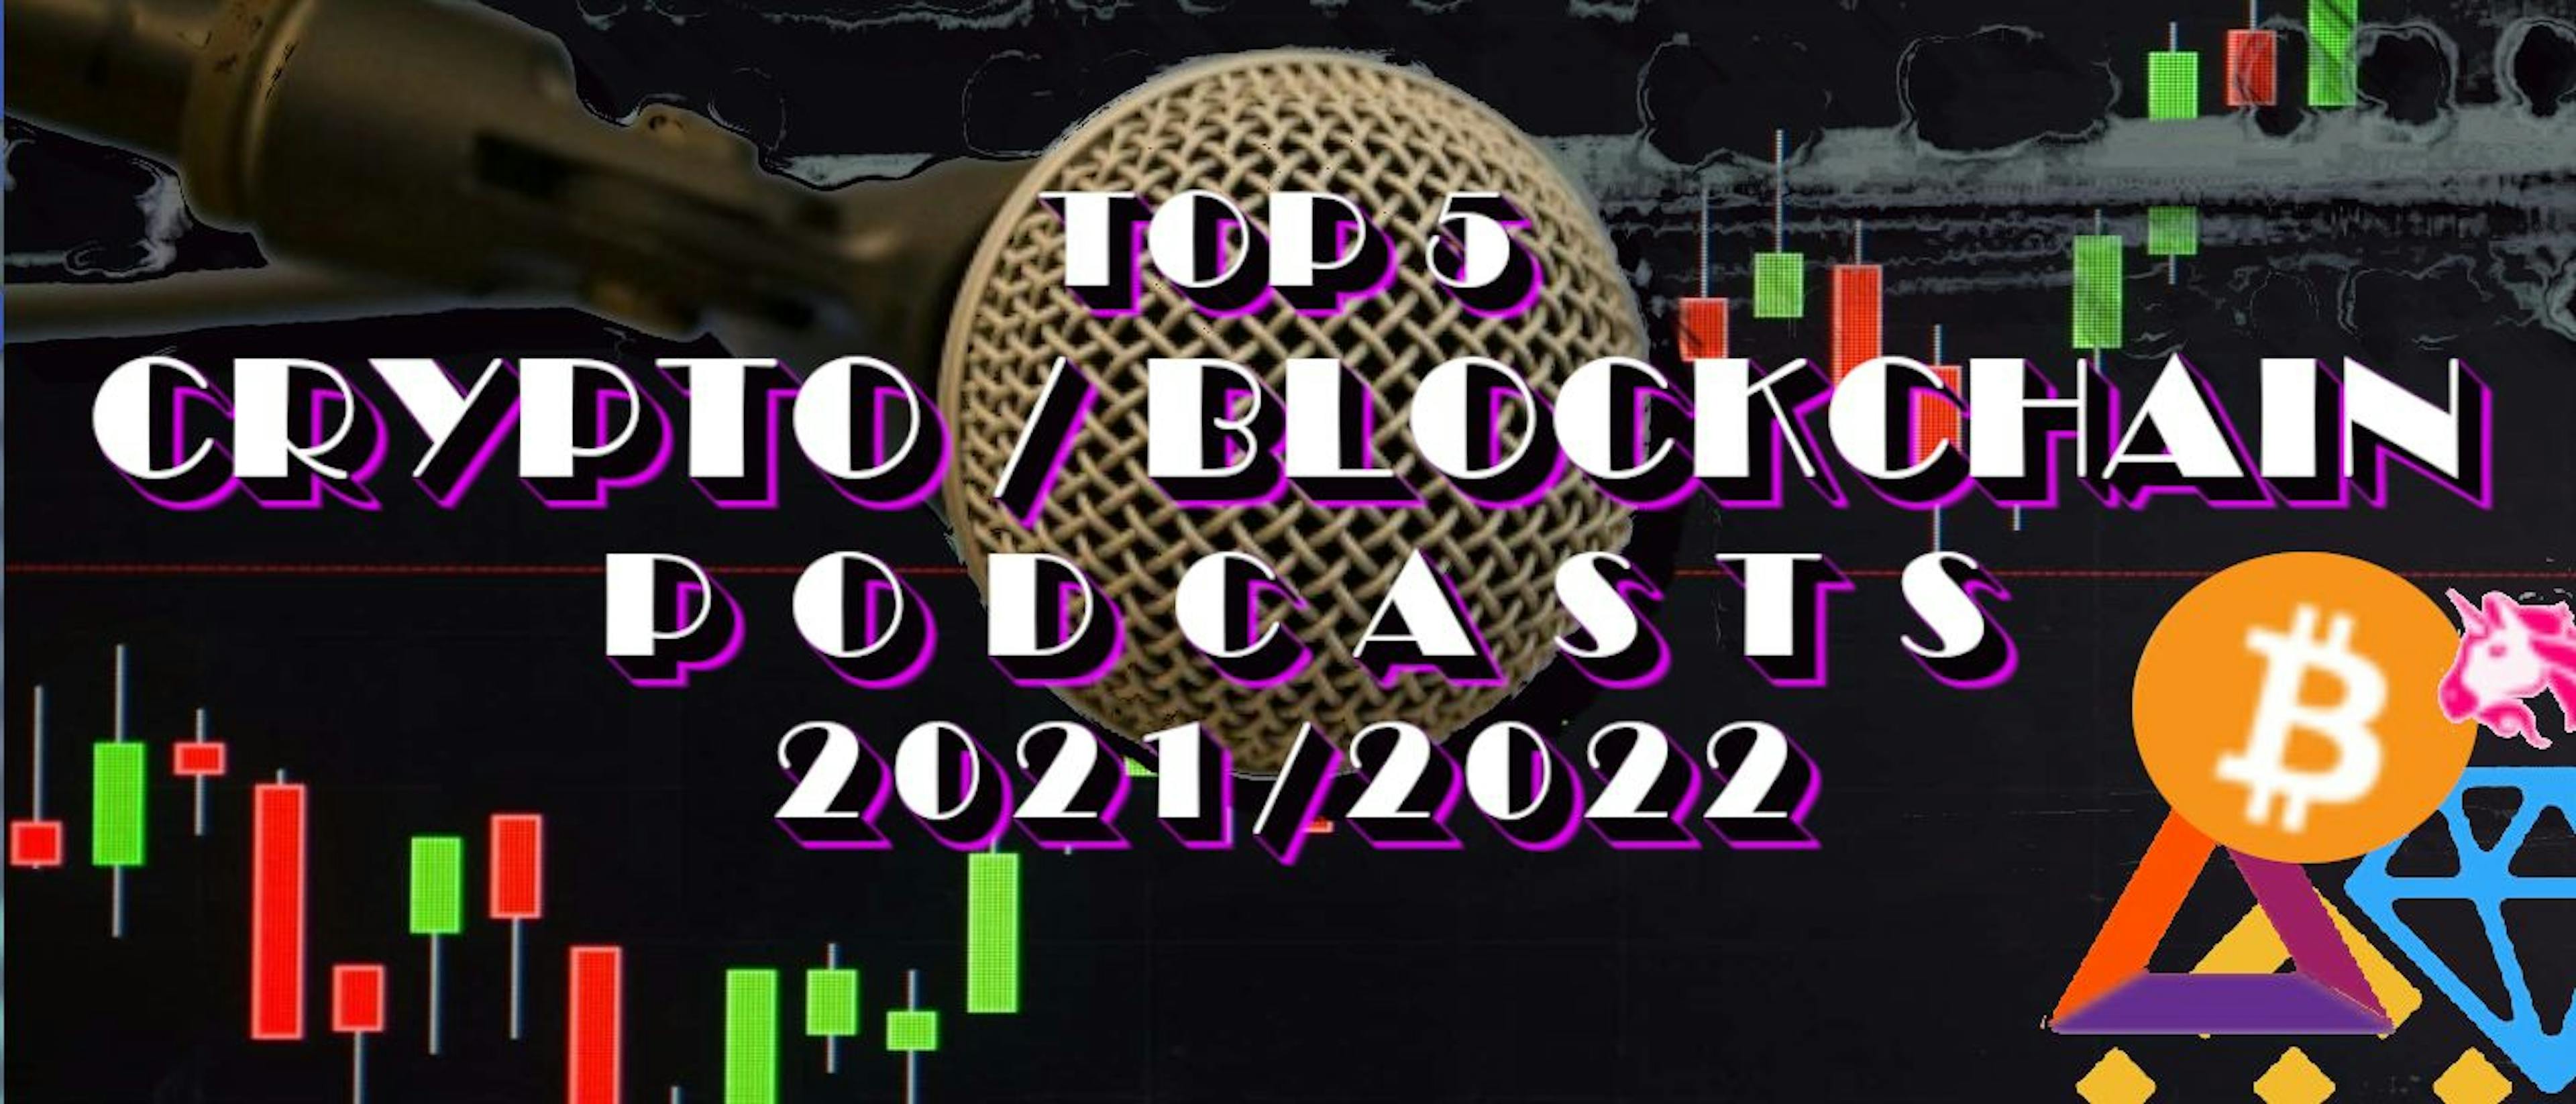 featured image - Top 5 Crypto + Bitcoin Podcasts: 2021/2022 